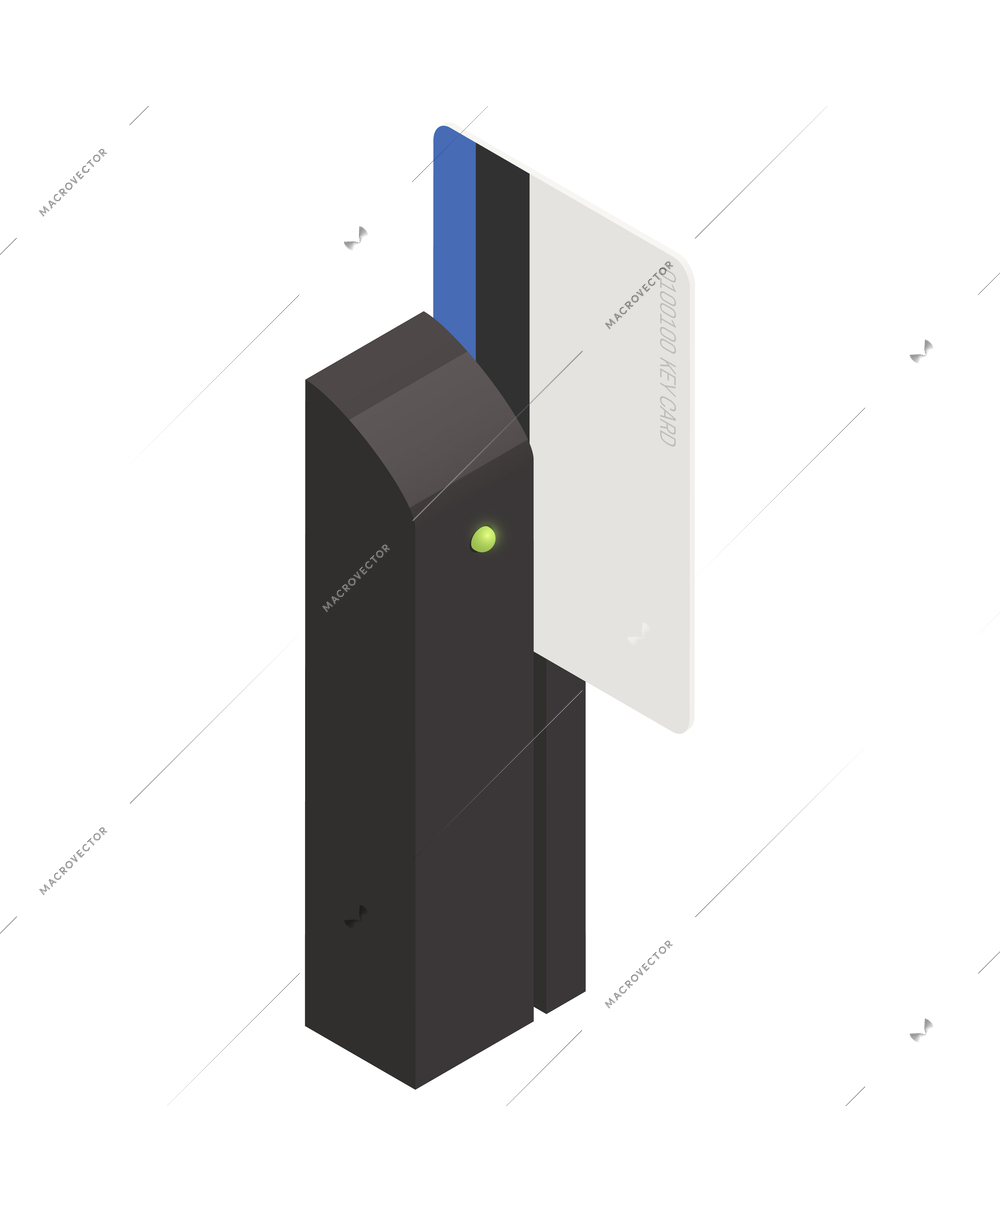 Magnetic swipe card reader access identification technology isometric icon vector illustration